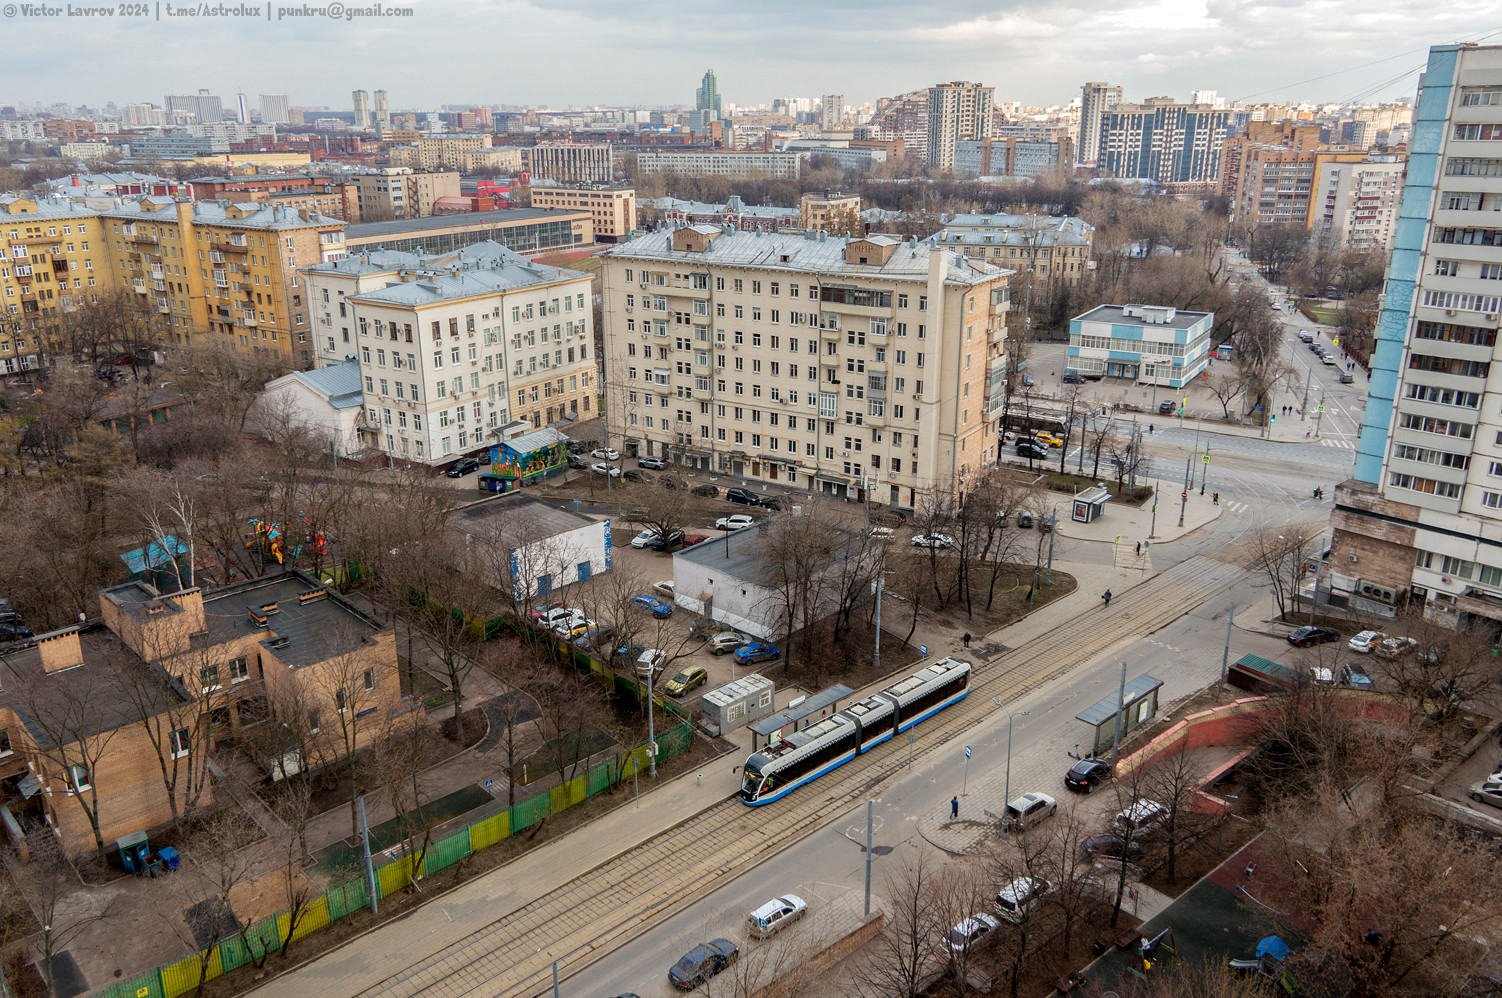 Moscova — Tram lines: Eastern Administrative District; Moscova — Views from a height